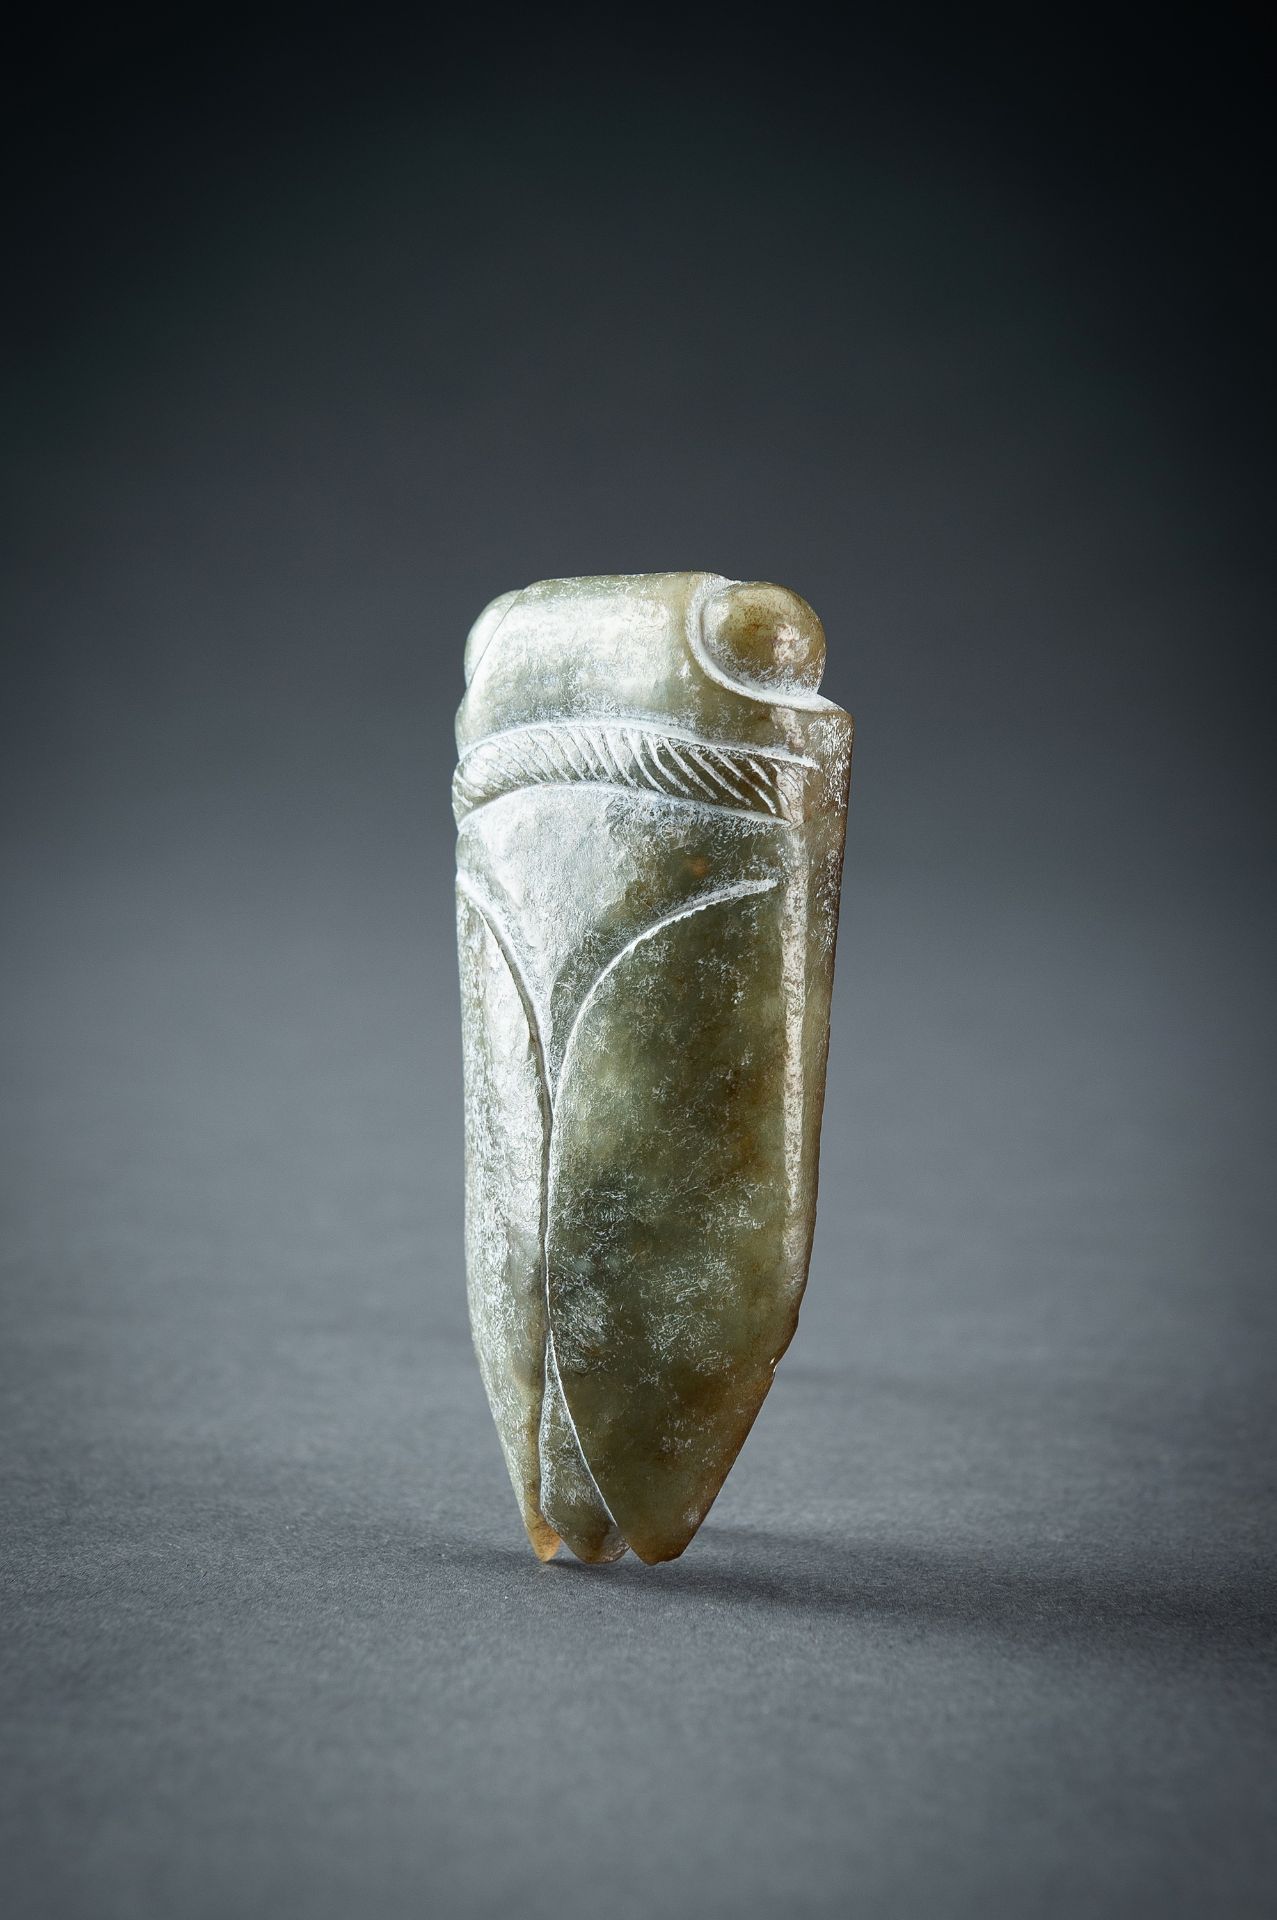 AN ARCHAISTIC GREEN JADE PENDANT OF A CICADA - Image 5 of 20